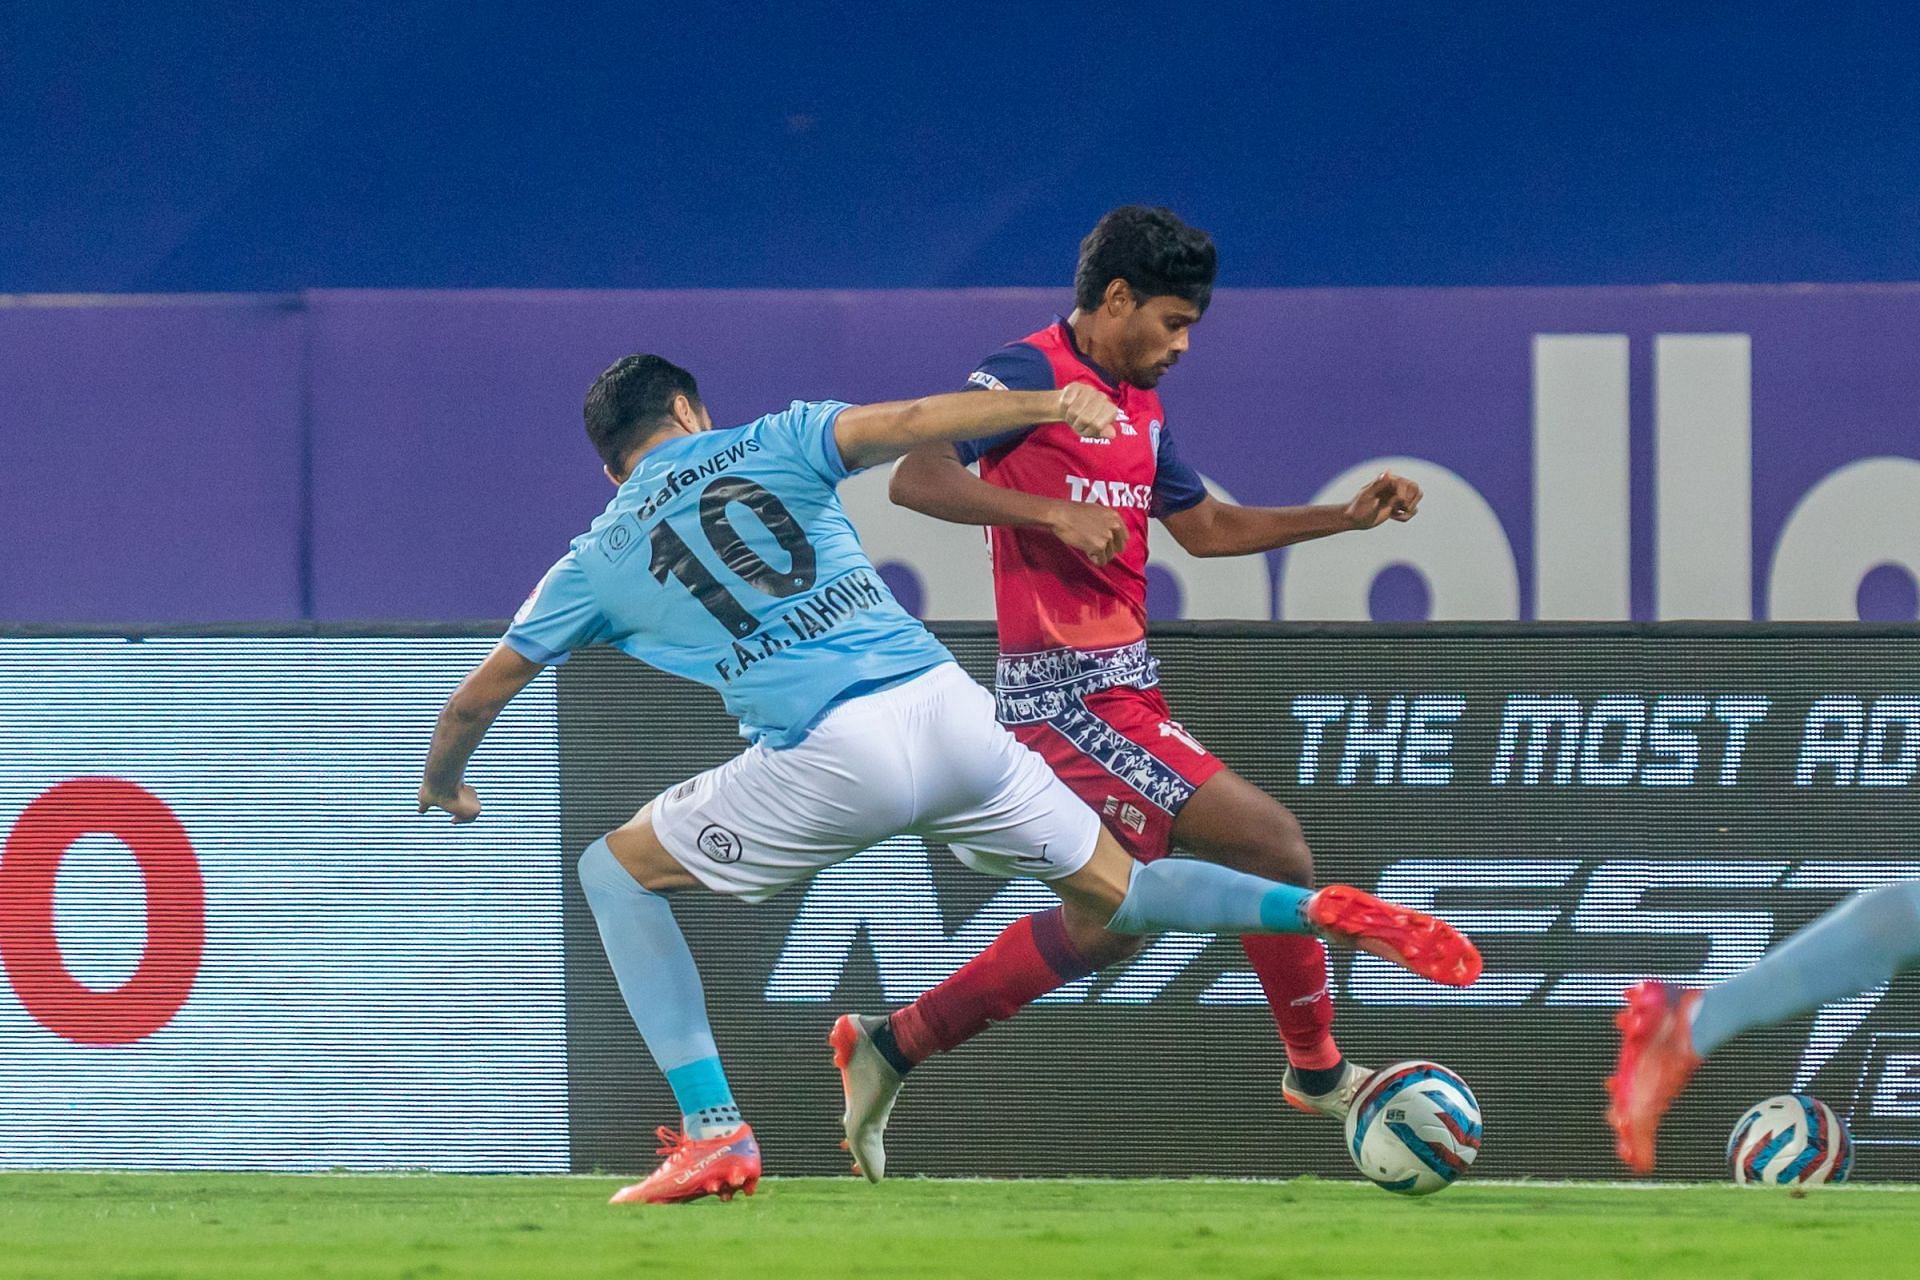 Mumbai City FC&#039;s Ahmed Jahouh trying to defend against Jamshedpur FC&#039;s Ritwik Das (Image Courtesy: ISL)